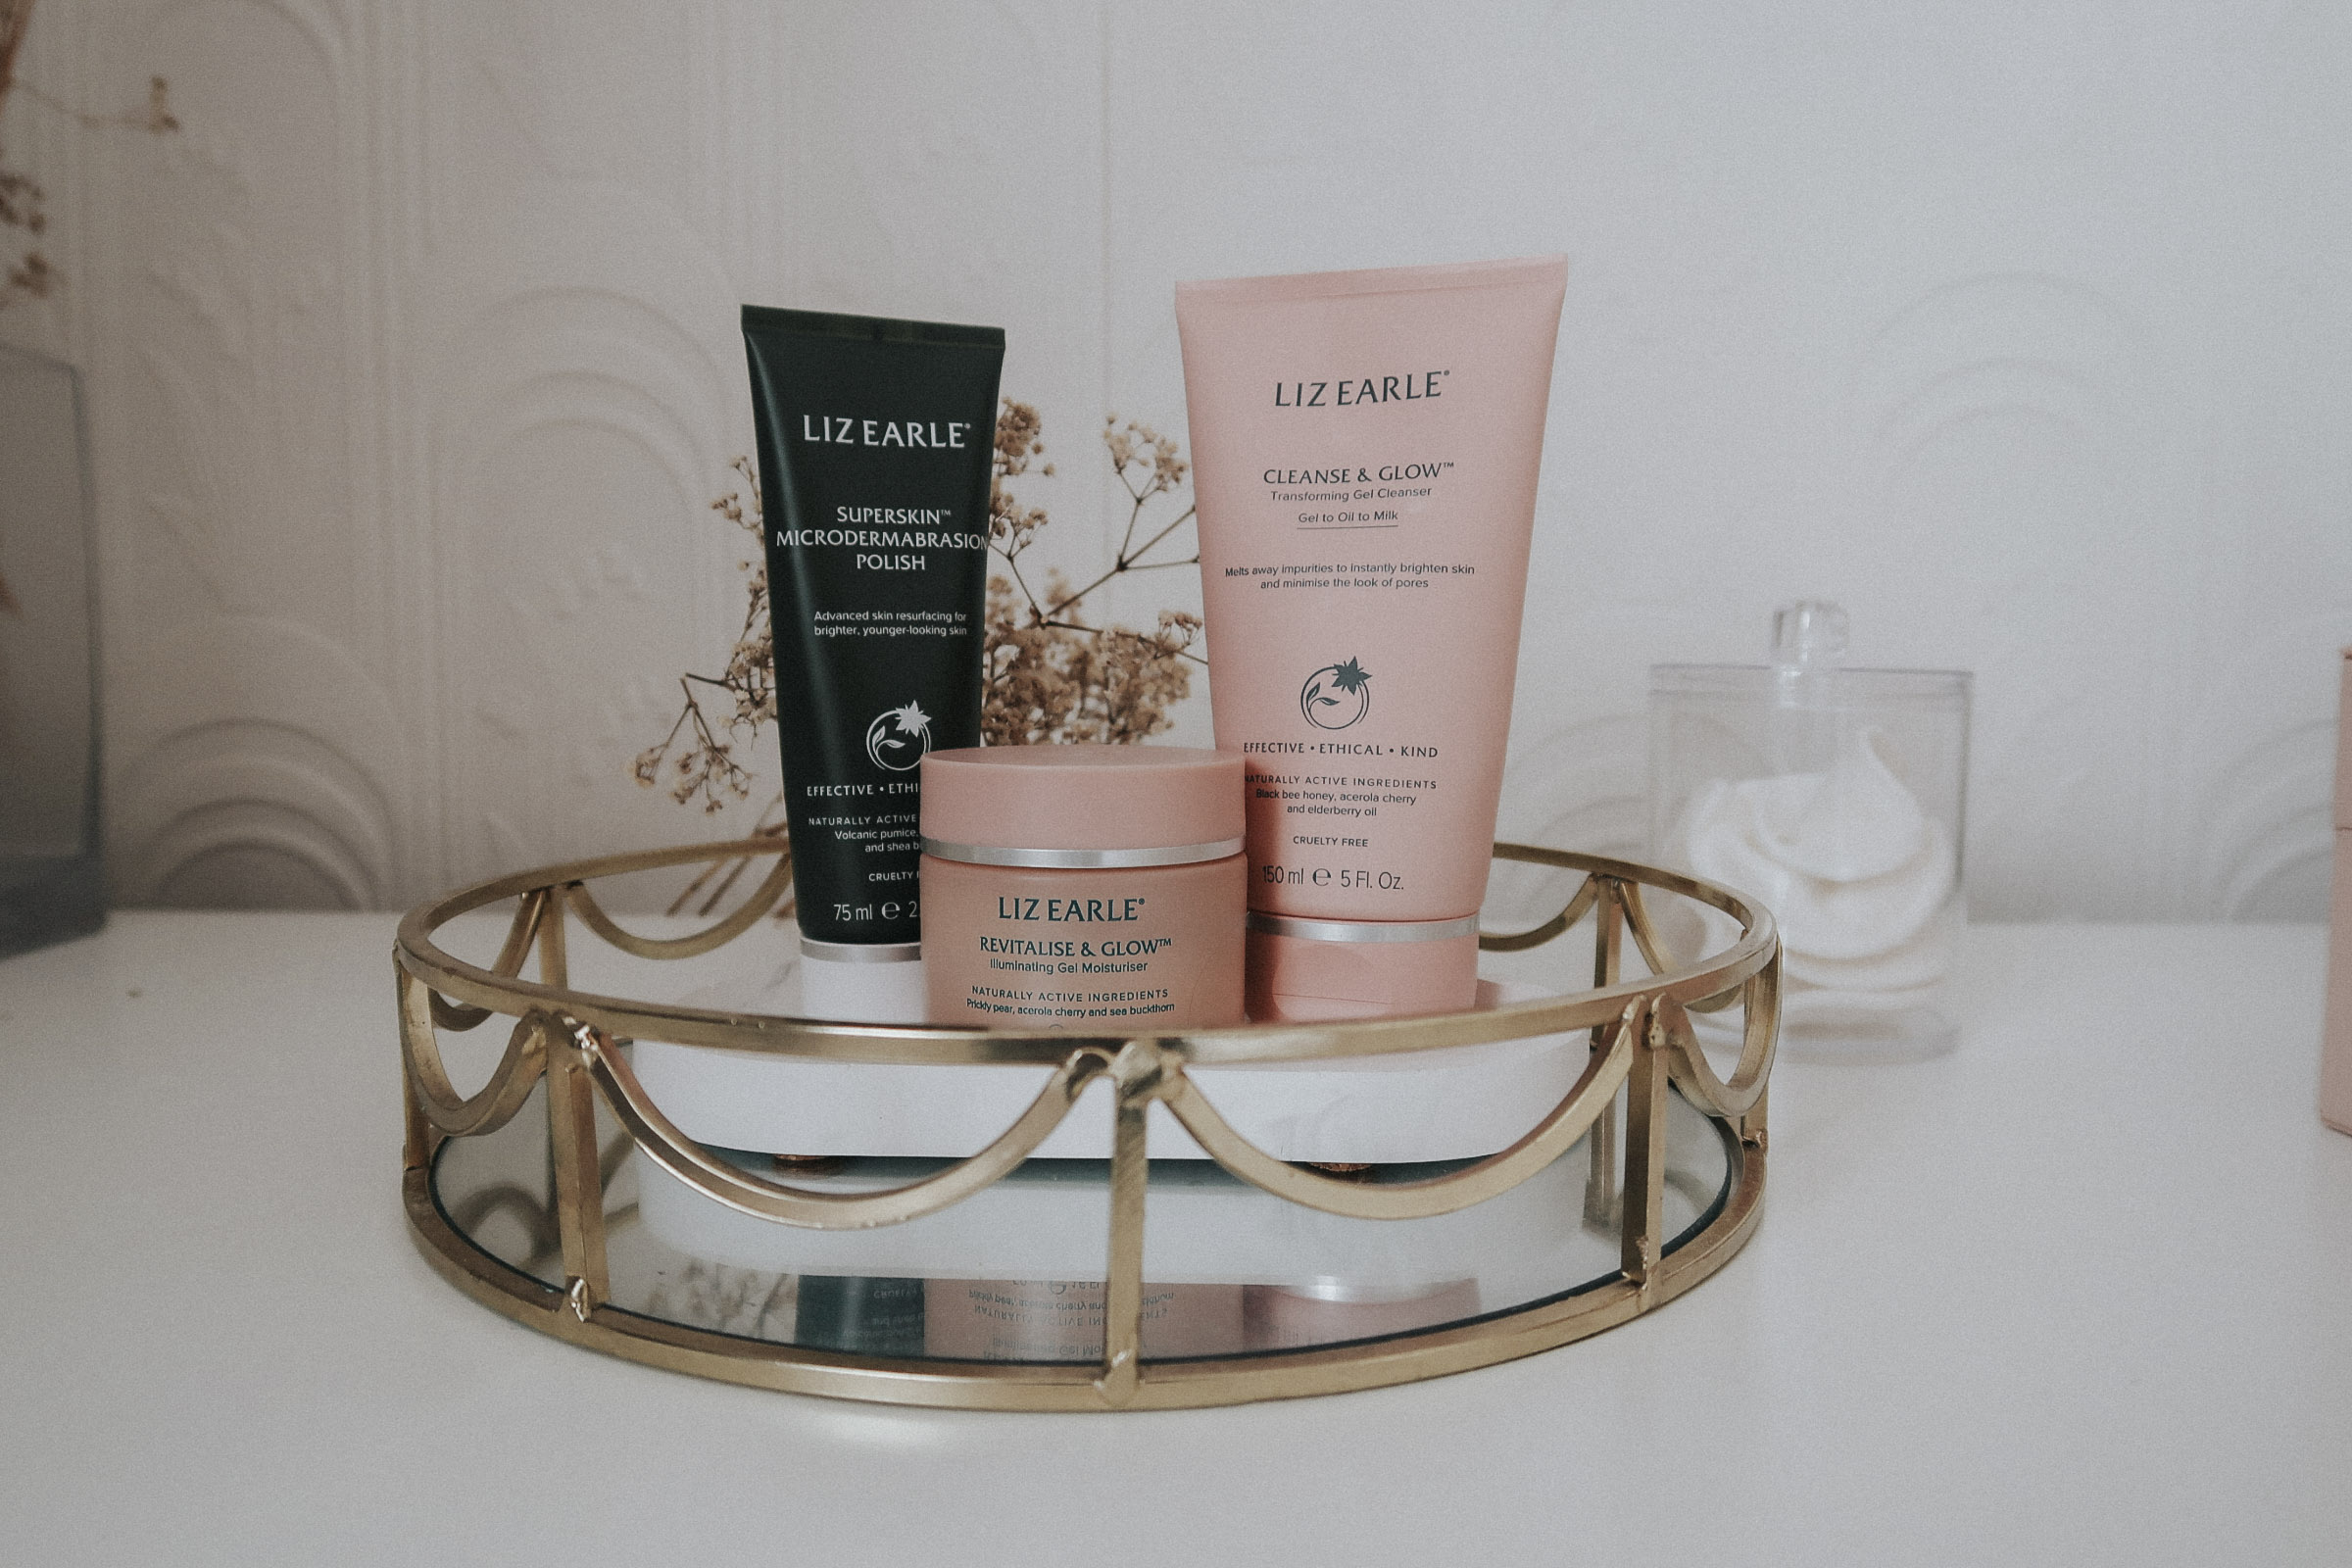 Liz Earle skincare products.